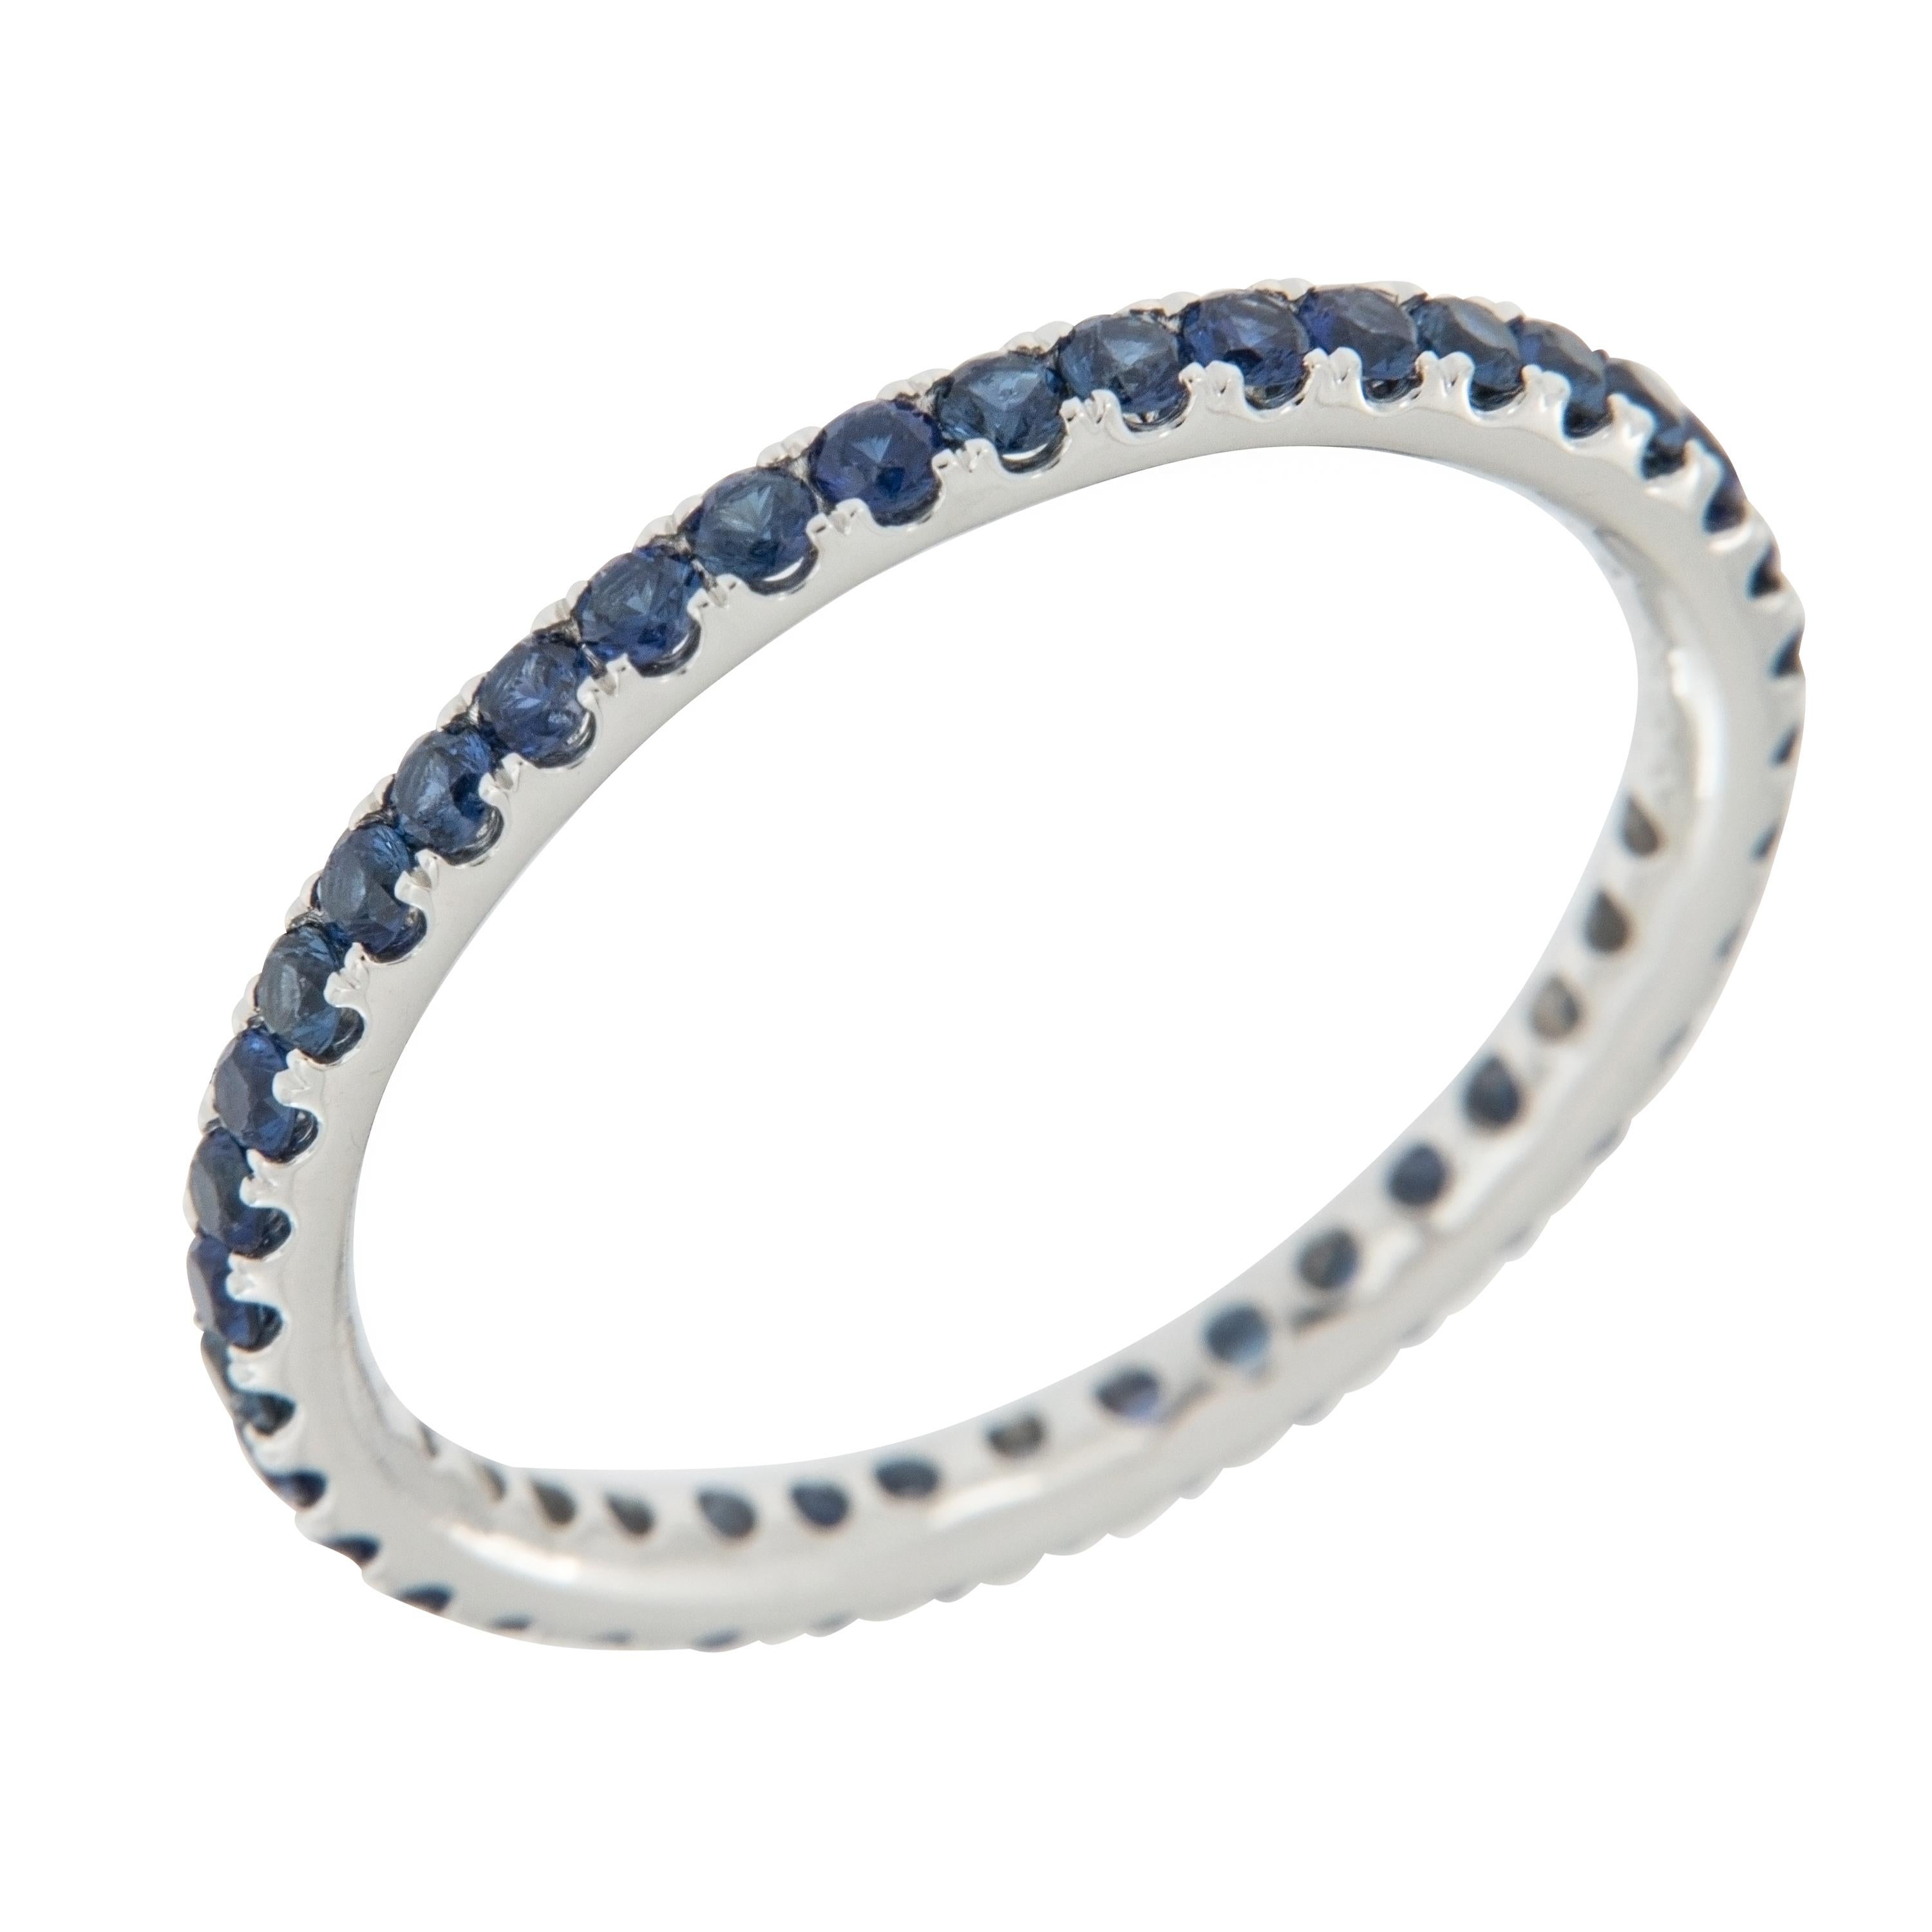 Serine is this 18 karat white gold blue sapphire eternity ring with 39 sapphires = 0.78 Cttw in a size 6! Sapphire is the birthstone for September and also given as a gem for the 5th, 23rd and 45th wedding anniversaries. This ring looks fantastic